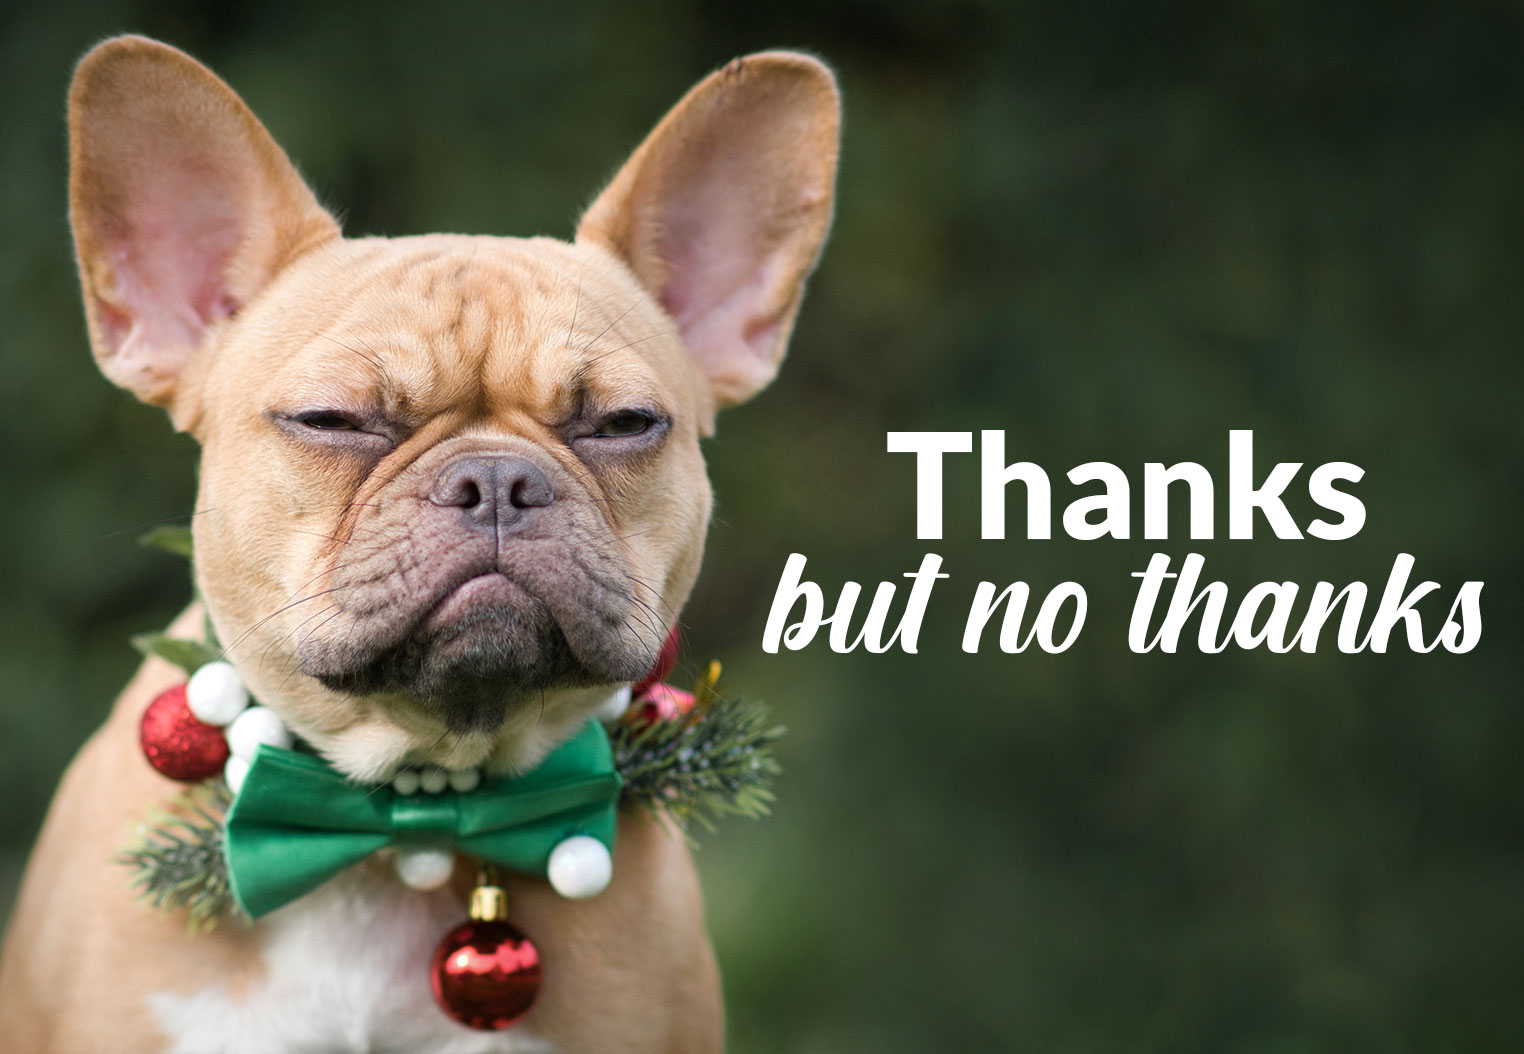 A red fawn French Bulldog looks at the camera with a disdainful expression. The dog is wearing a collar decorated with a green bow, a conifer sprig, and red and white ornaments. Next to the dog is text that reads: “Thanks but no thanks.”